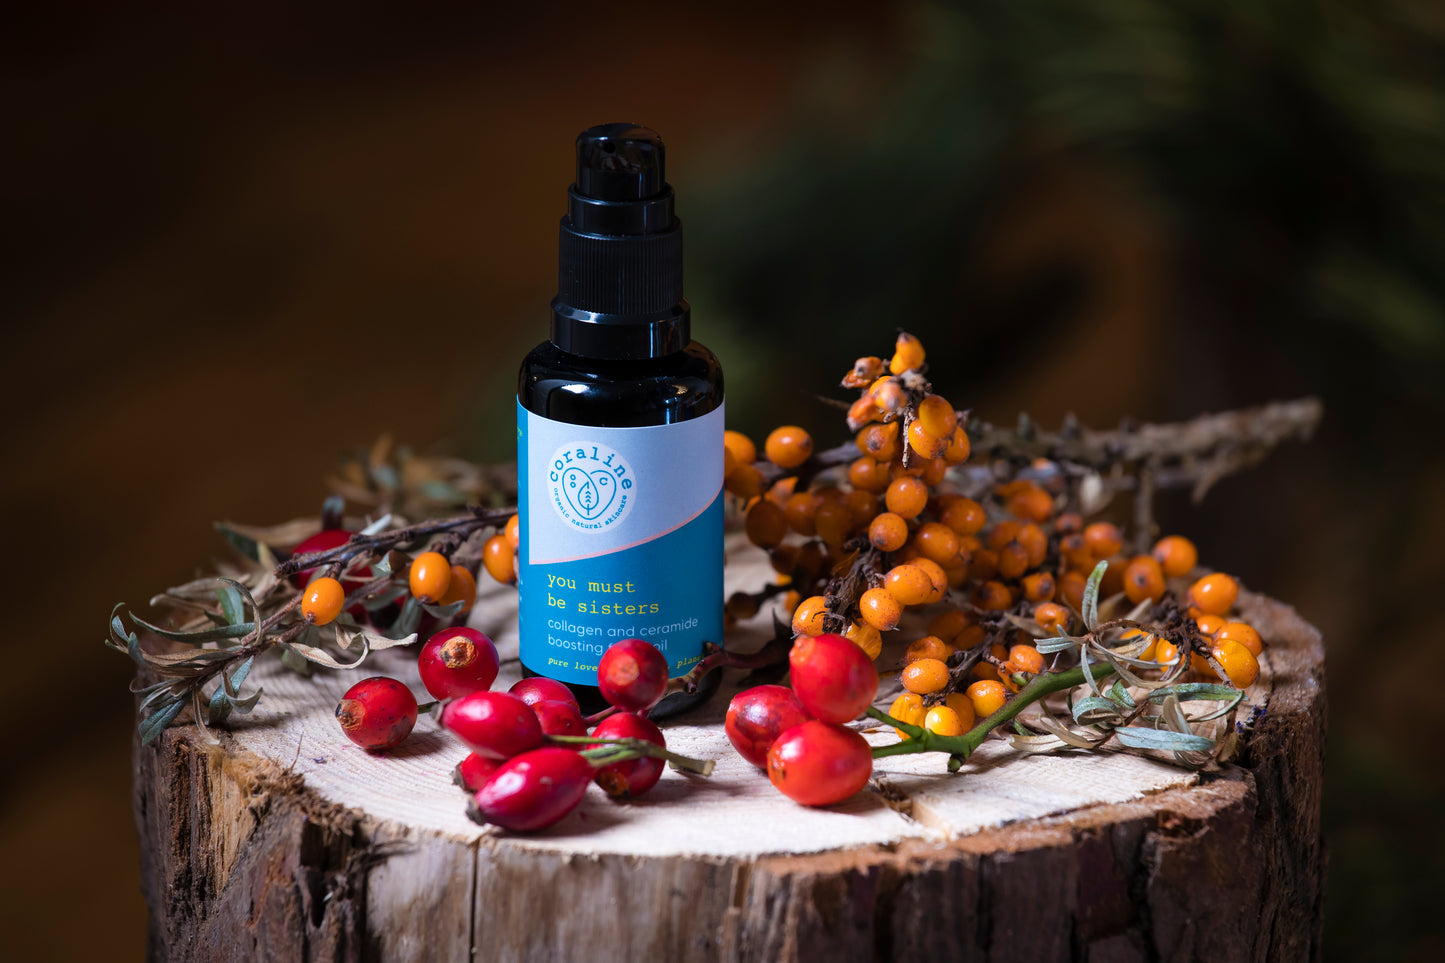 A blue-labeled dropper bottle of 'You Must Be Sisters' collagen and ceramide booster rests on a tree stump. Decorative branches with red and orange berries are arranged around the bottle, with a blurred background.